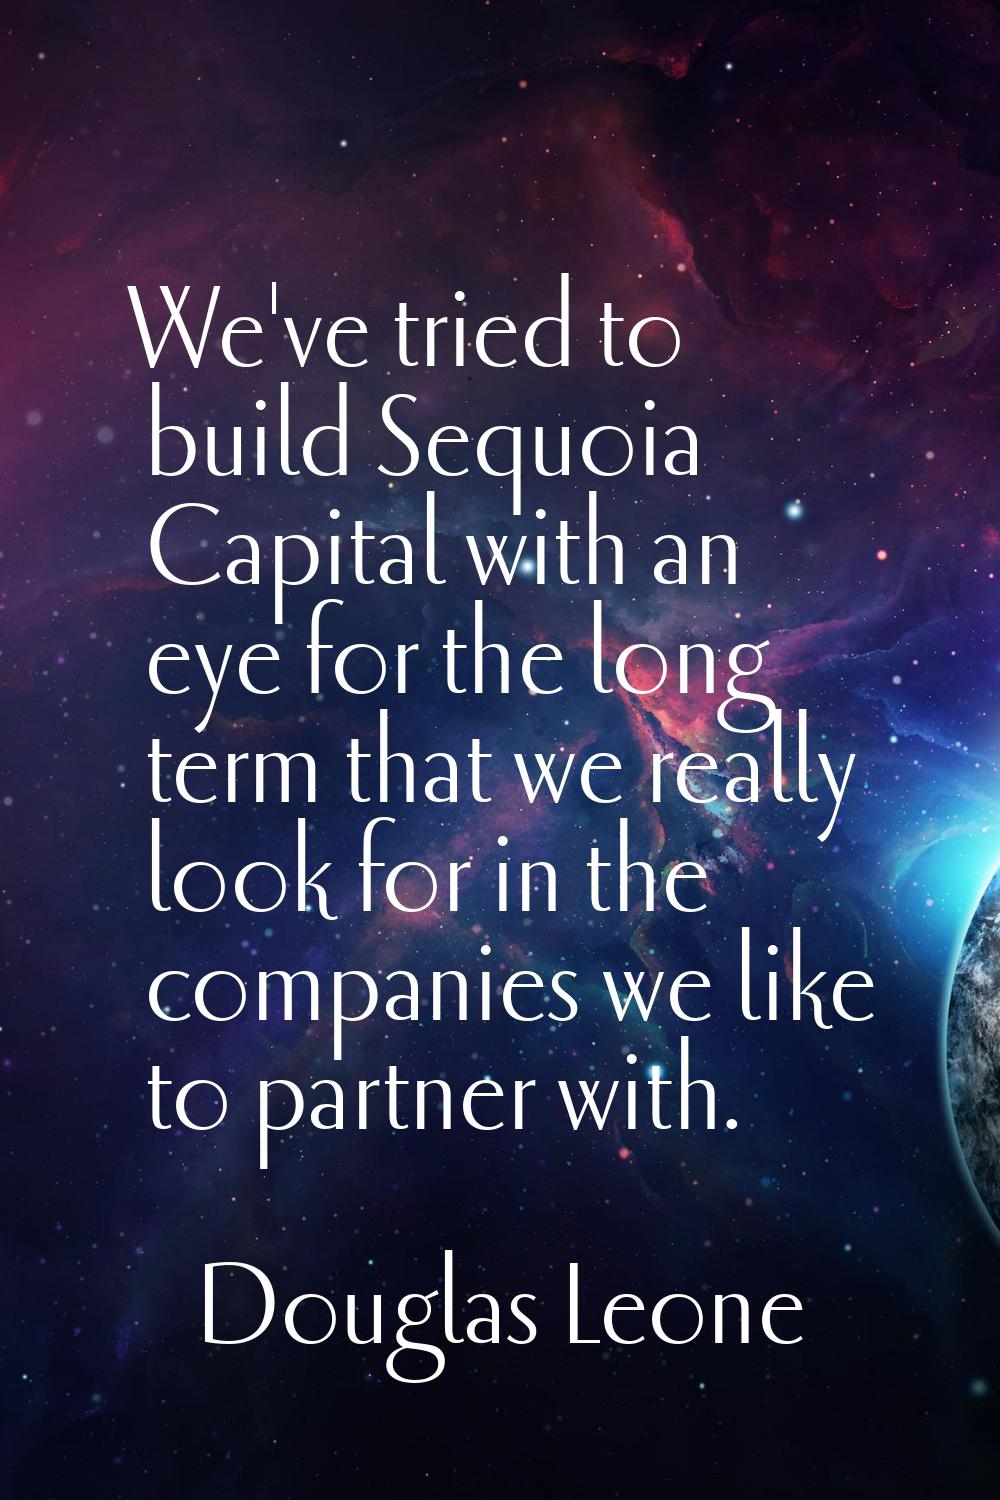 We've tried to build Sequoia Capital with an eye for the long term that we really look for in the c